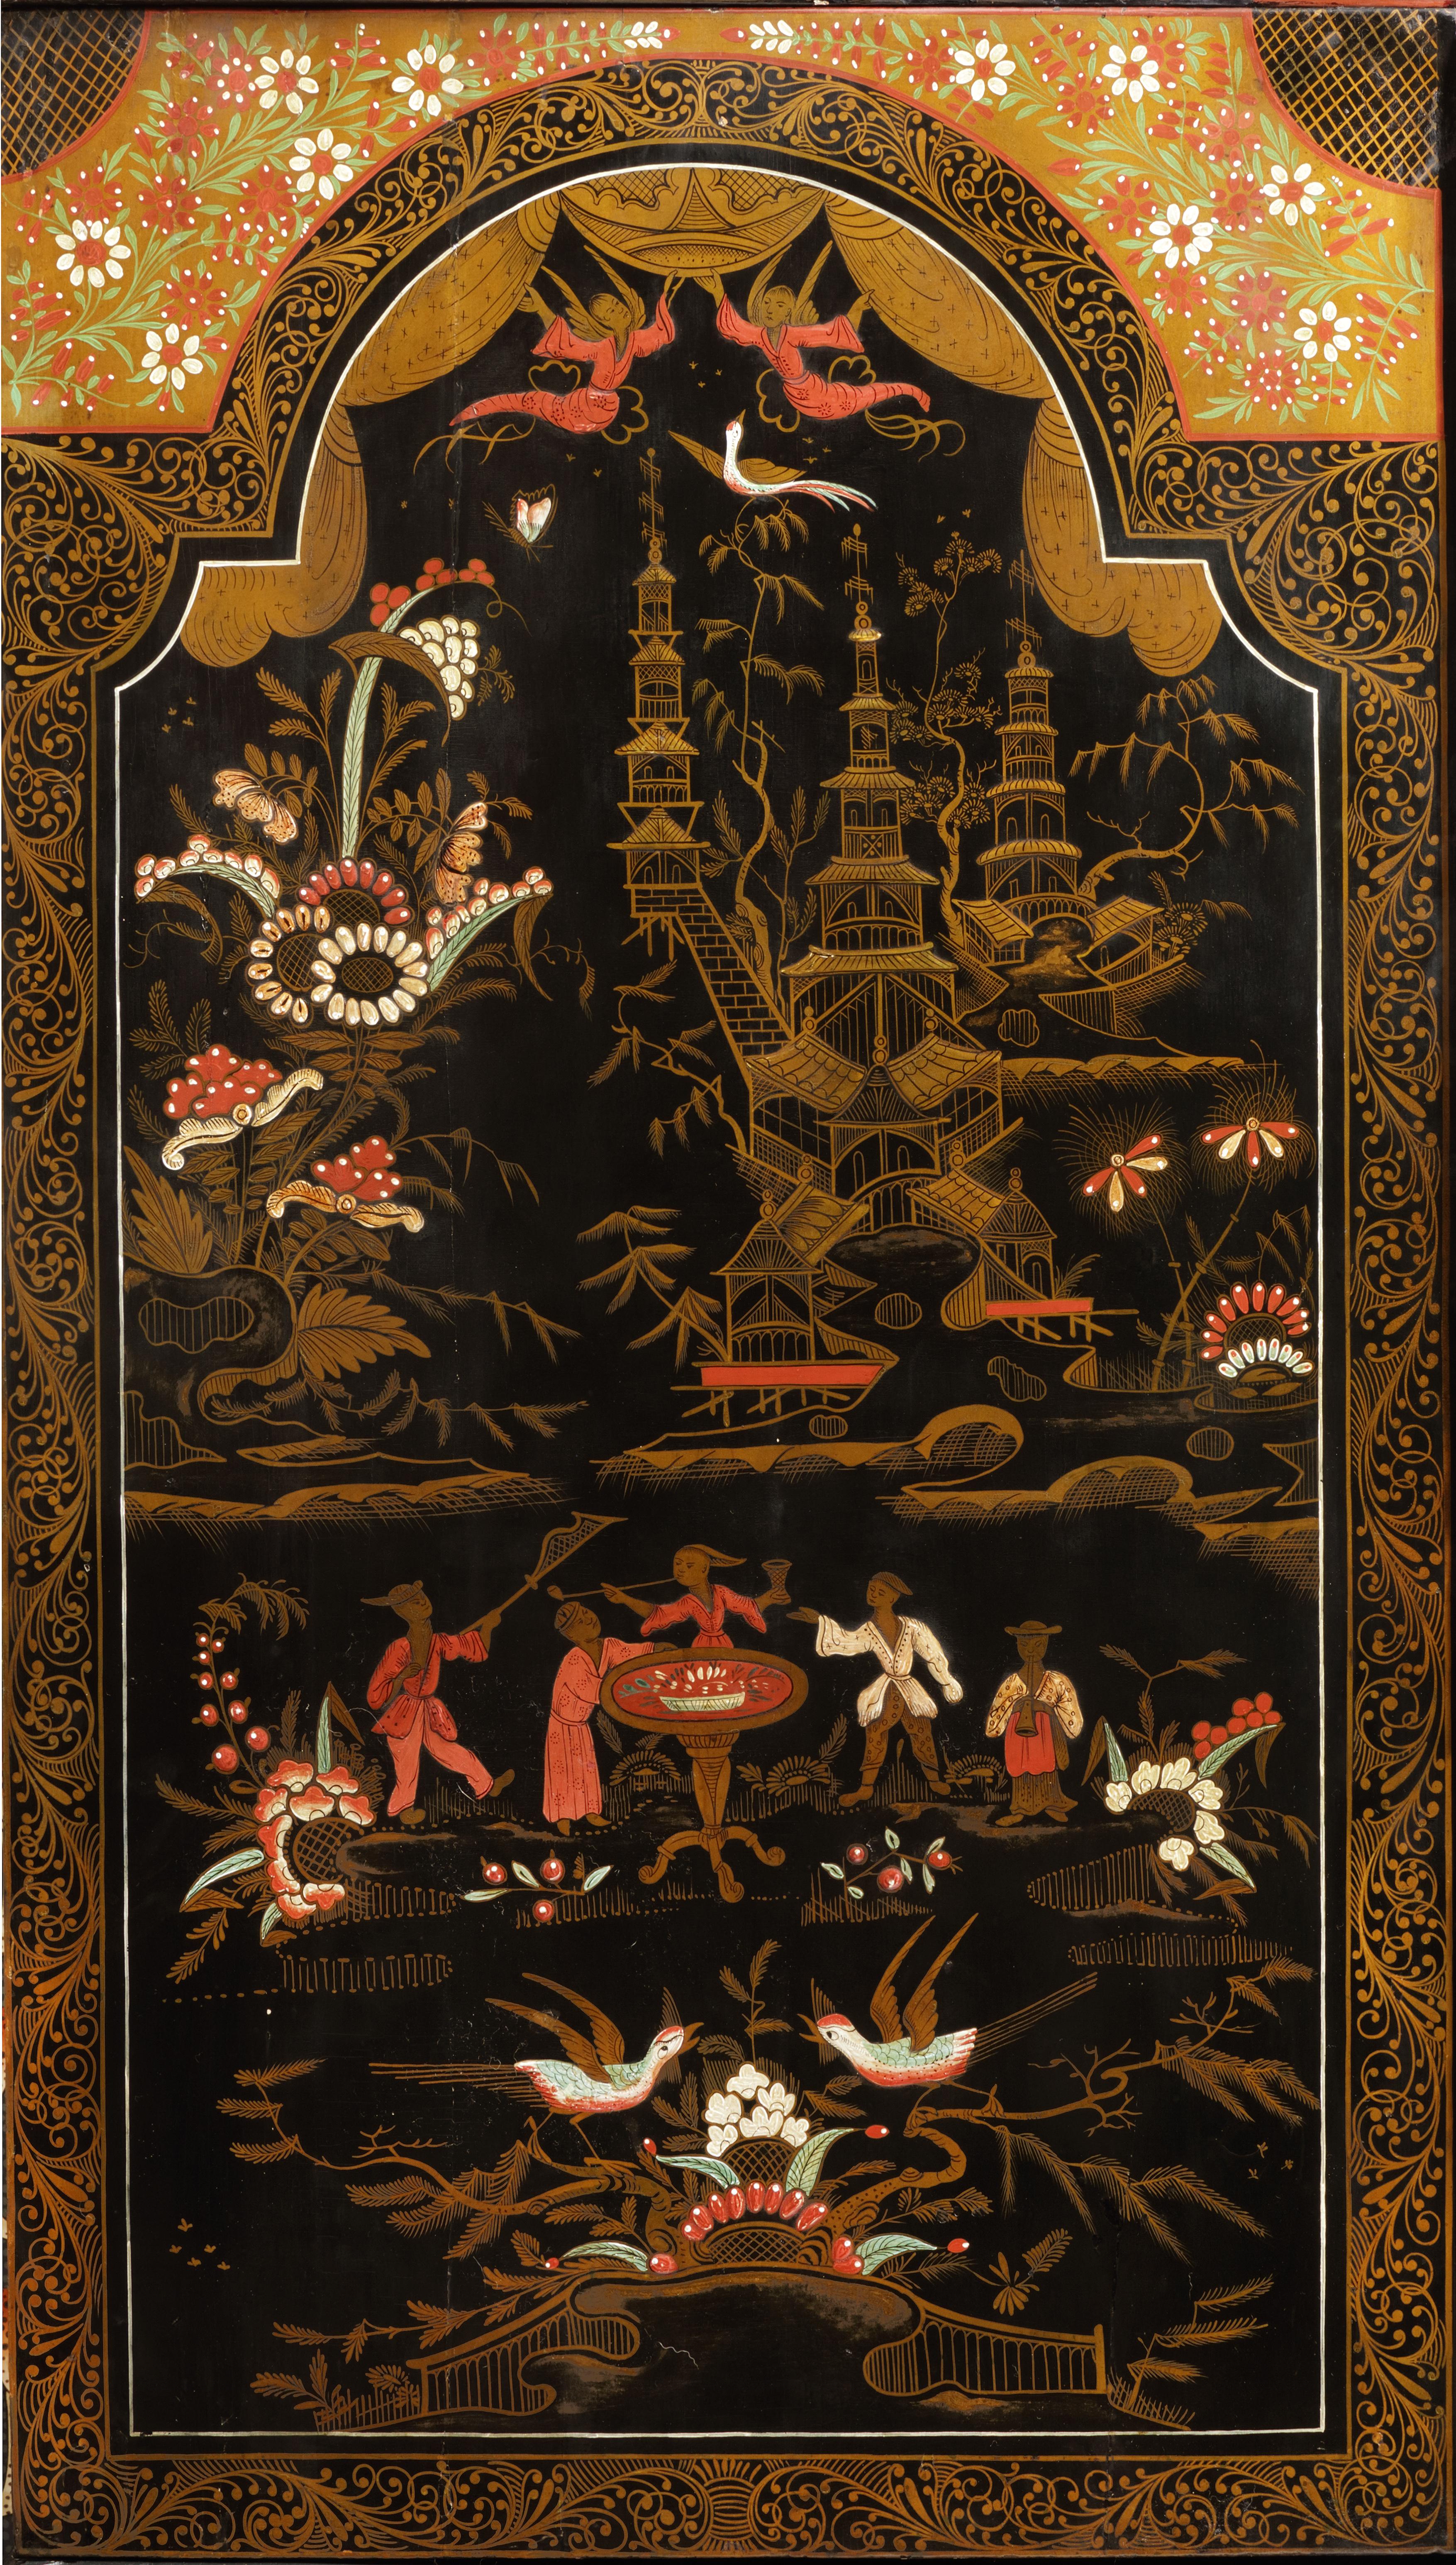 Hand-Painted Unique Dutch Lacquer Chinoiserie Cabinet on Stand, Late 17th Century